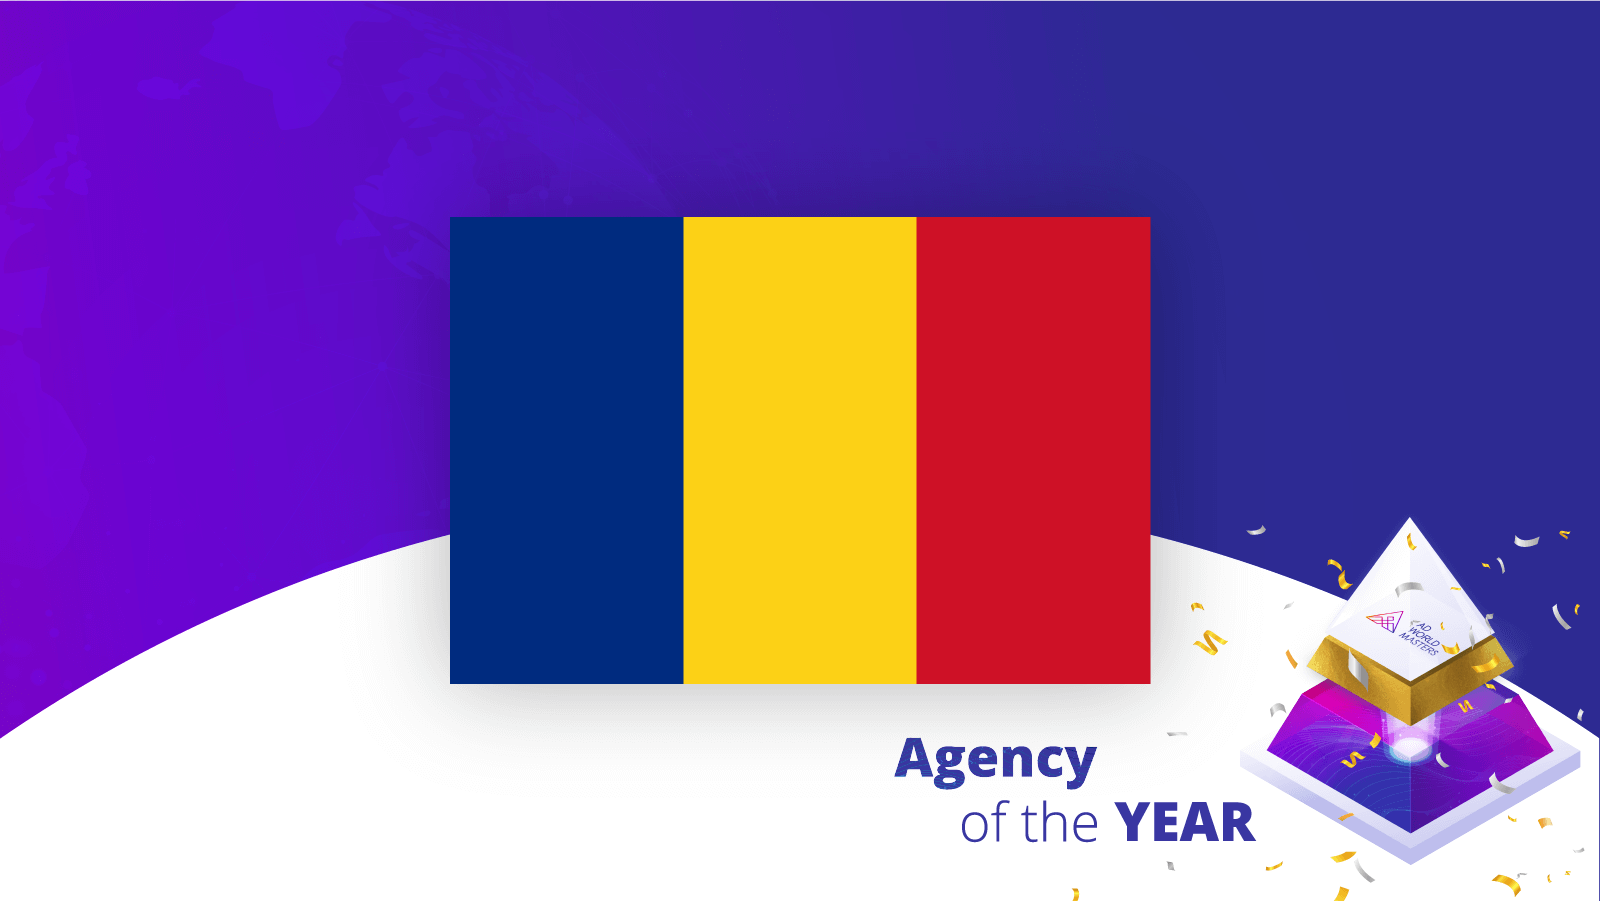 Agencies of the Year Romania